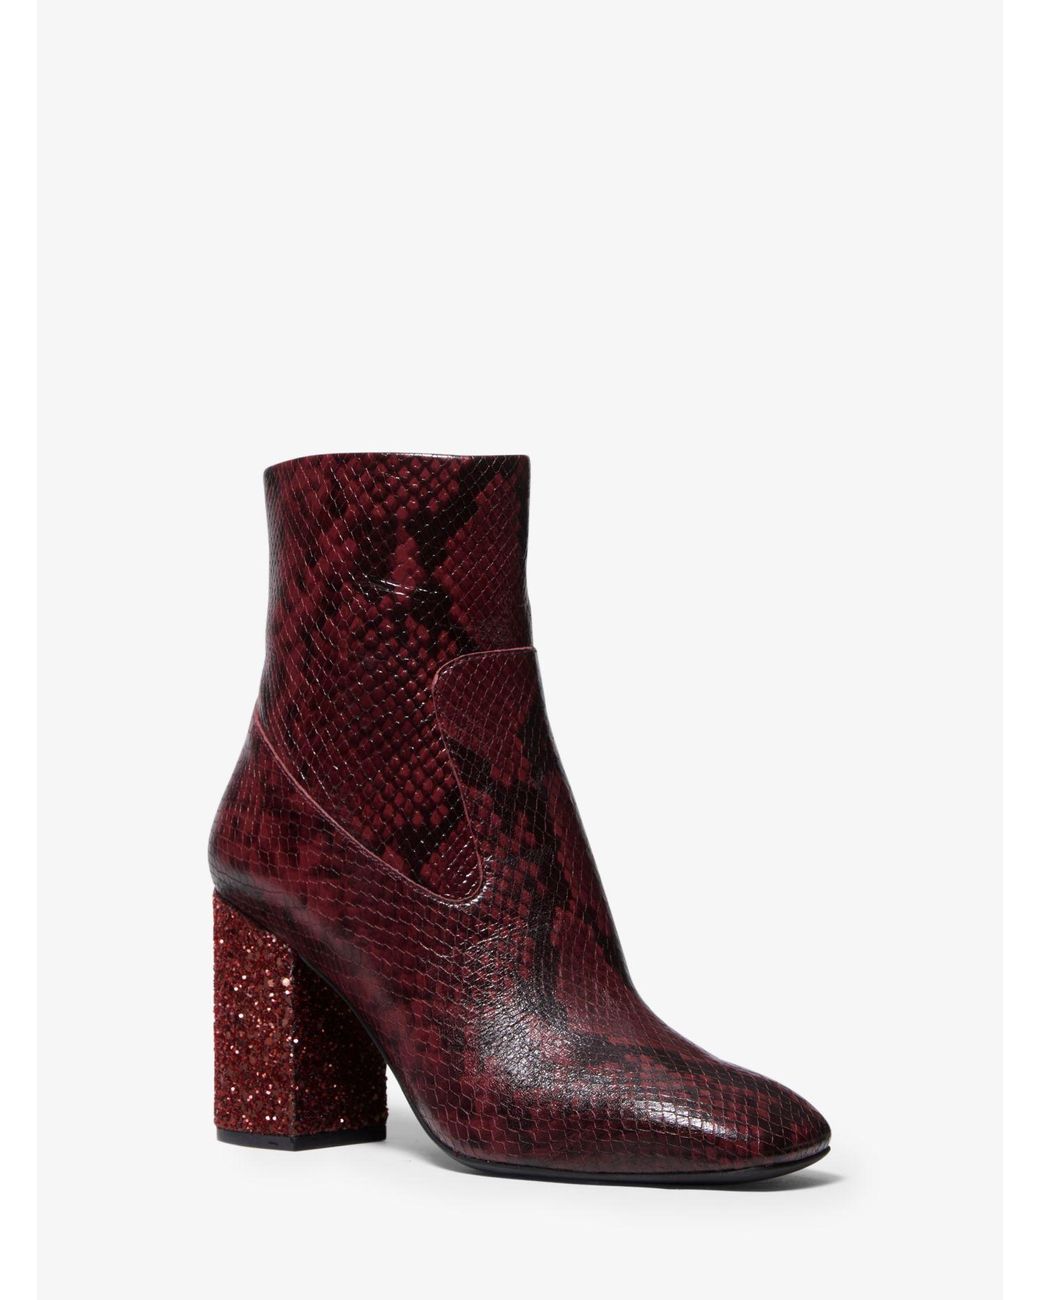 Michael Kors Marcella Flex Snake Embossed Leather Ankle Boot | Lyst